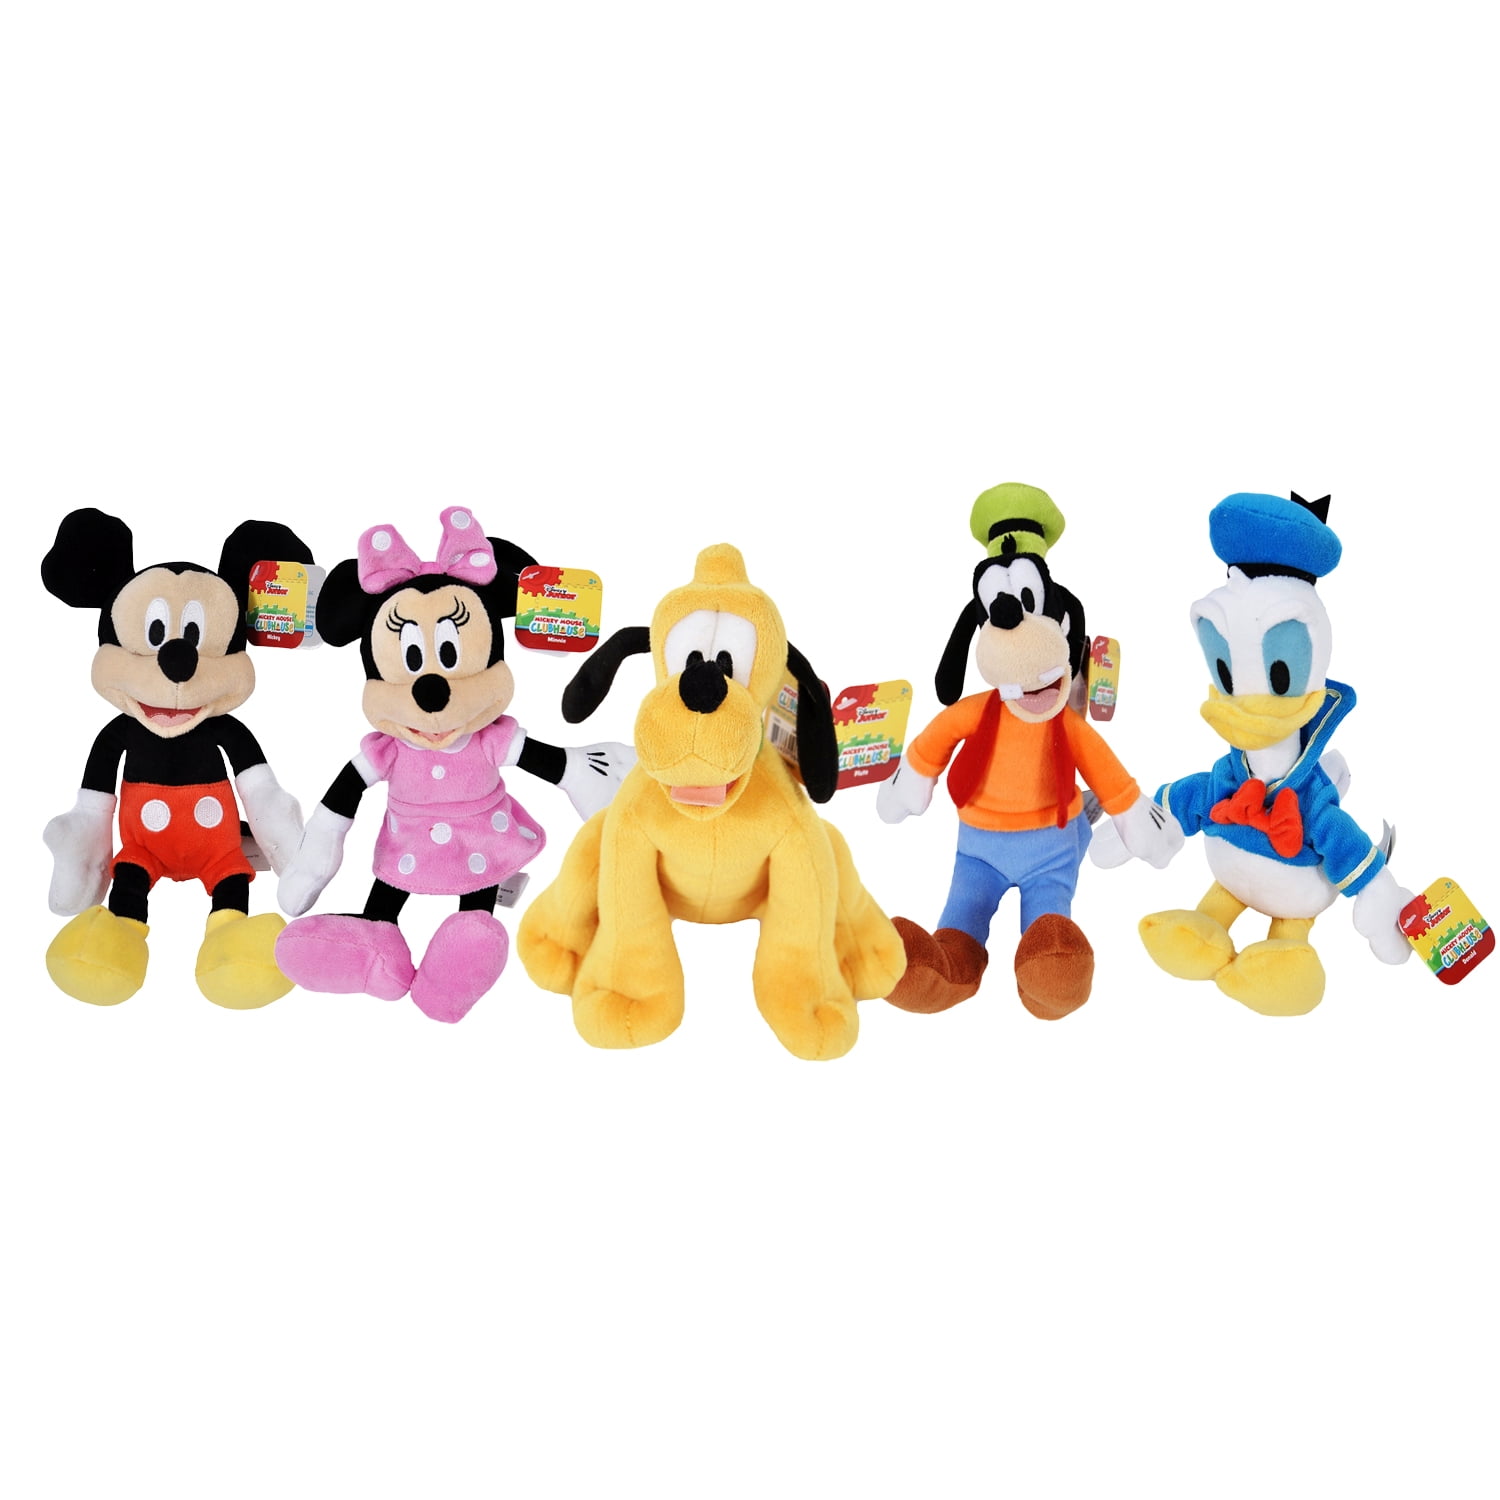 Minnie Mouse Pluto and Daisy Duck 22 Mickey Mouse and Friends Disney Bubble Balloon Donald Duck